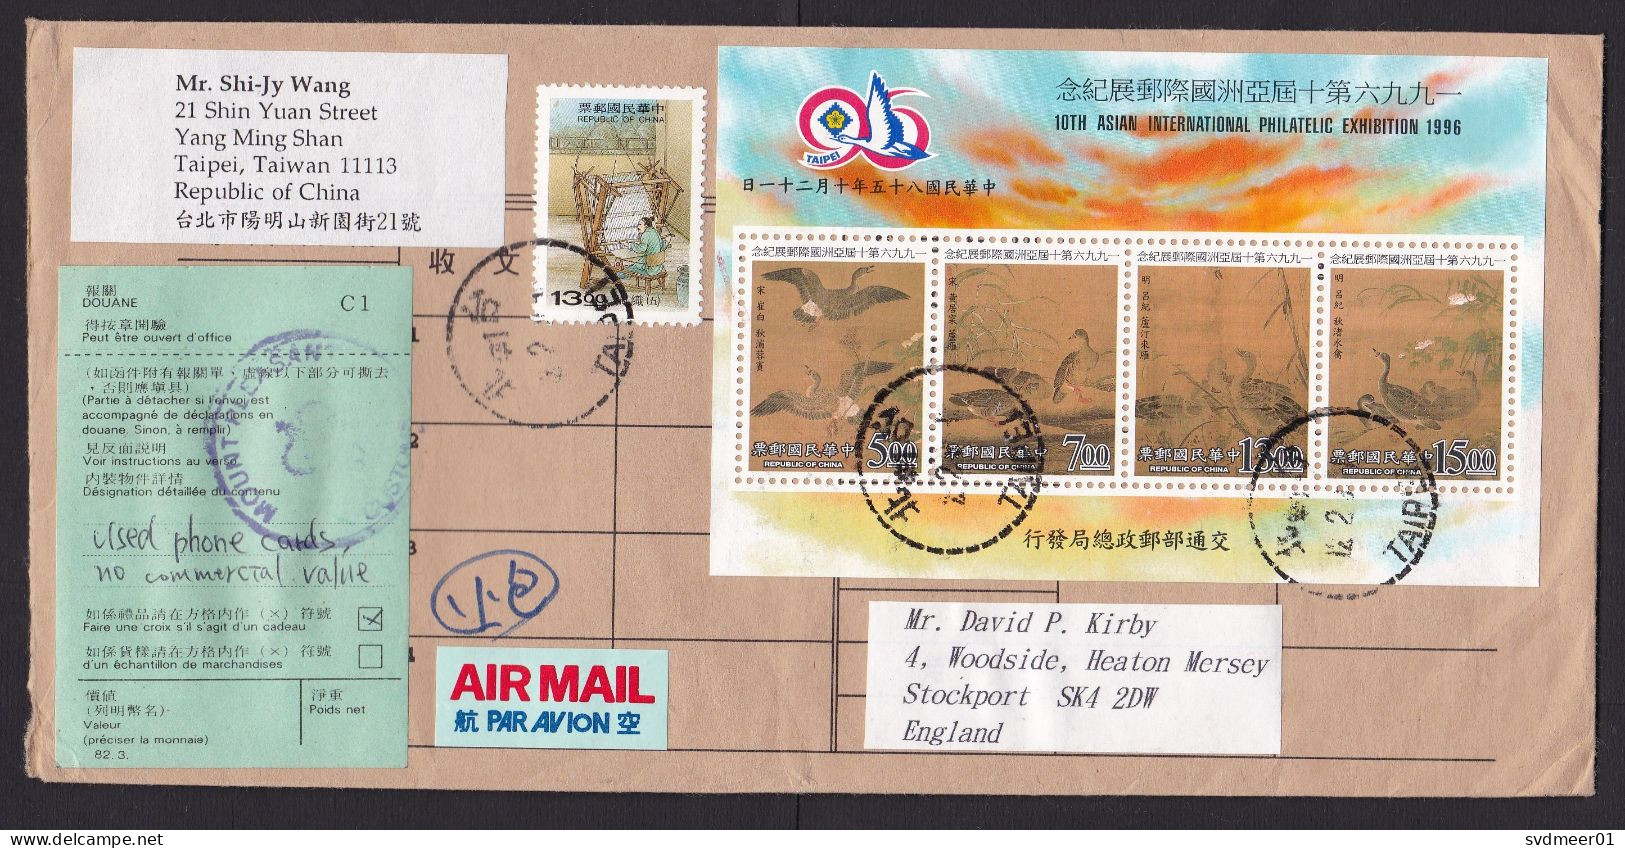 Taiwan: Airmail Cover To UK, 1996?, 5 Stamps, Souvenir Sheet, Bird, Exhibition, Loom, C1 Customs Label (traces Of Use) - Lettres & Documents